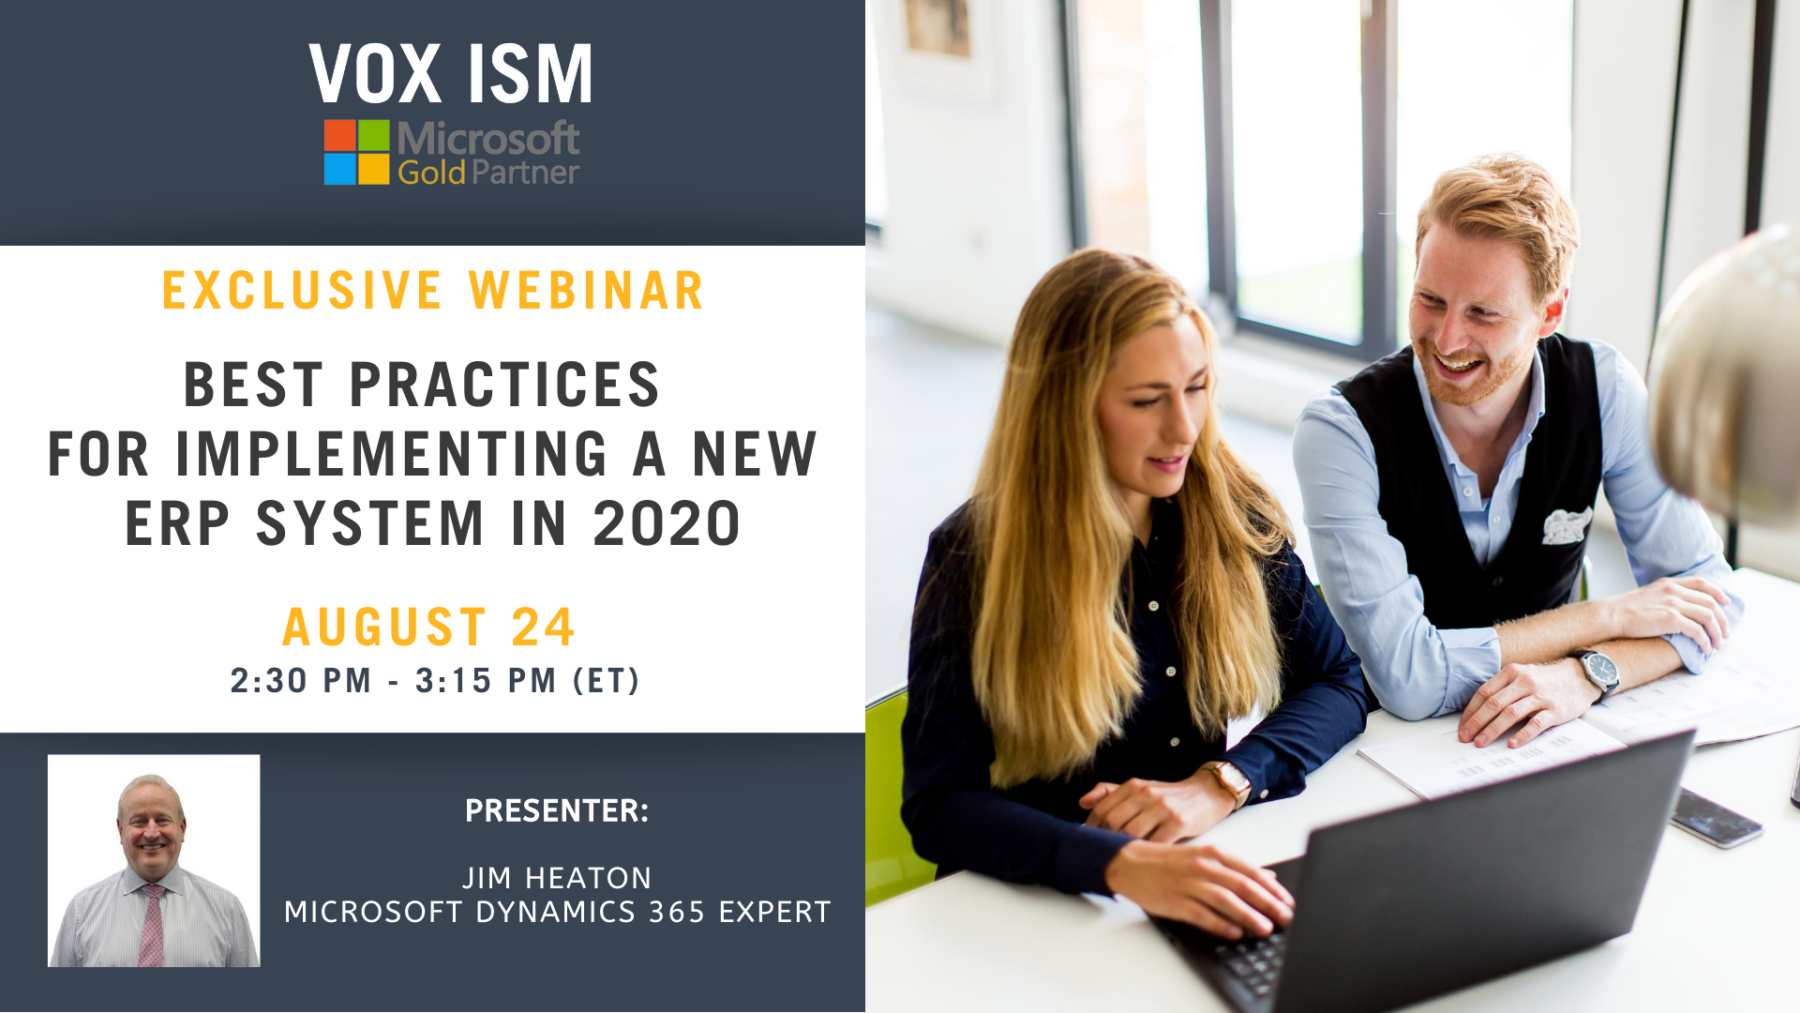 Best practices for implementing a new ERP system in 2020 - August 24 - Webinar